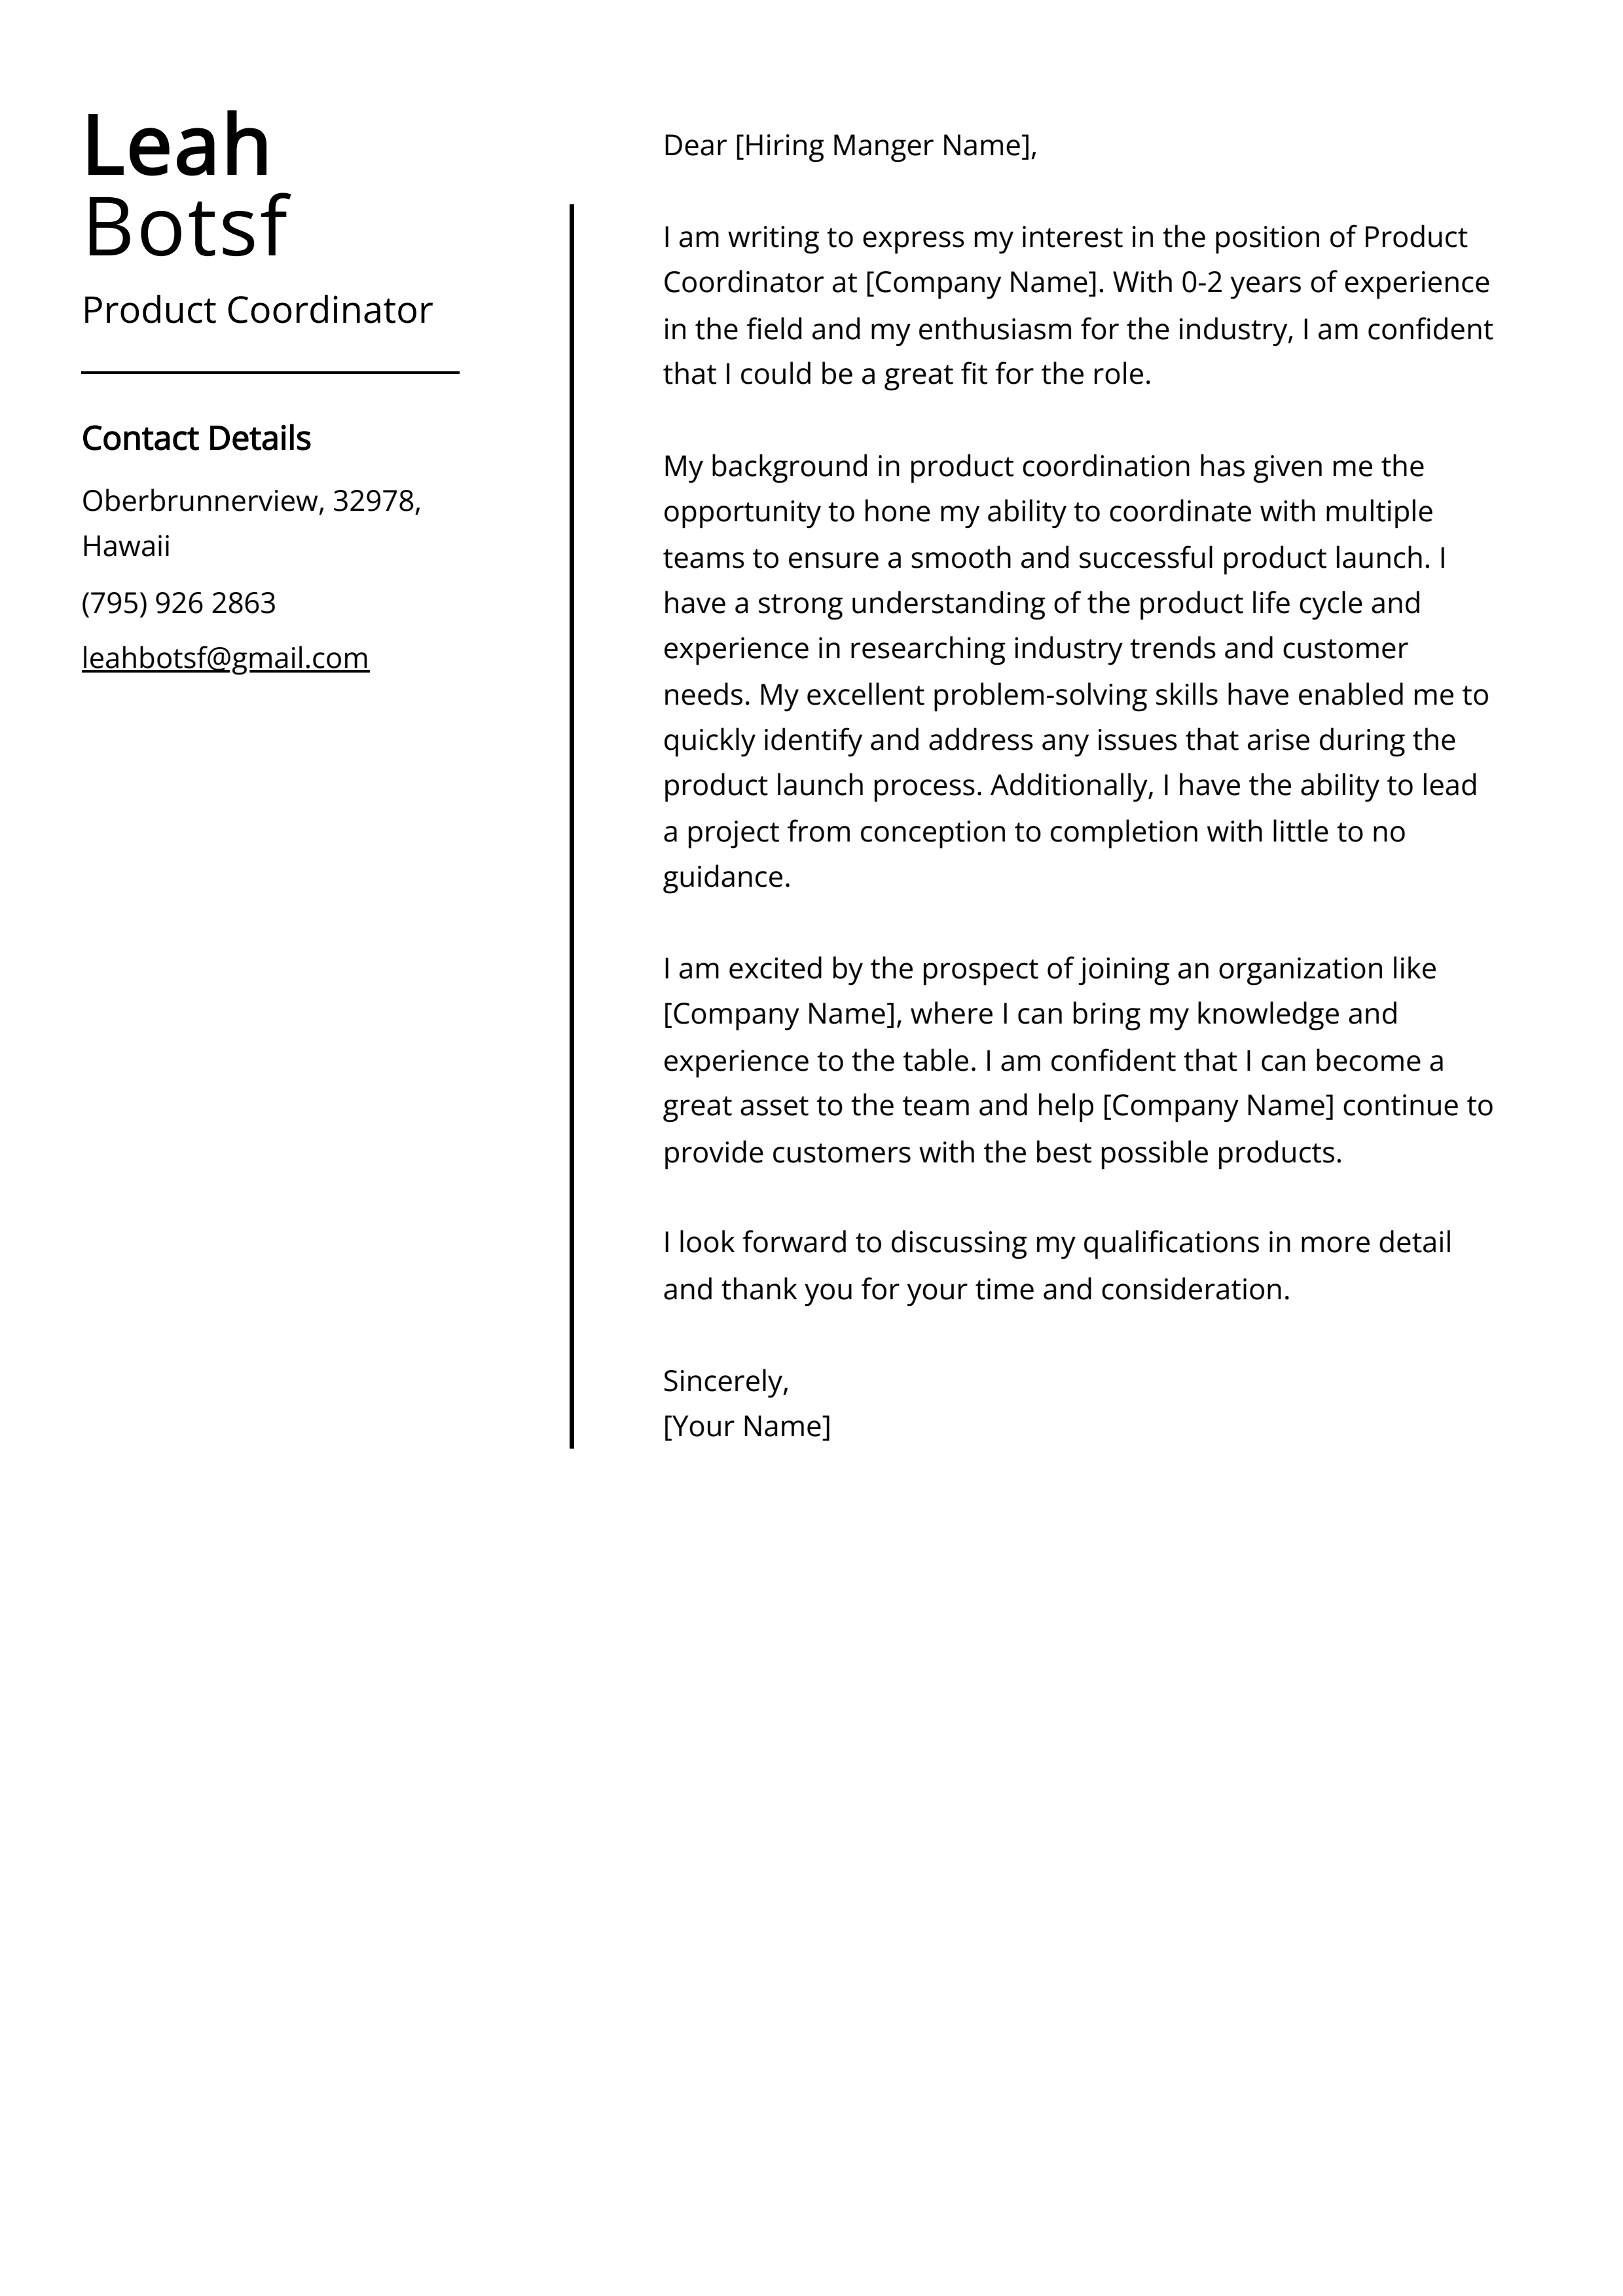 Product Coordinator Cover Letter Example